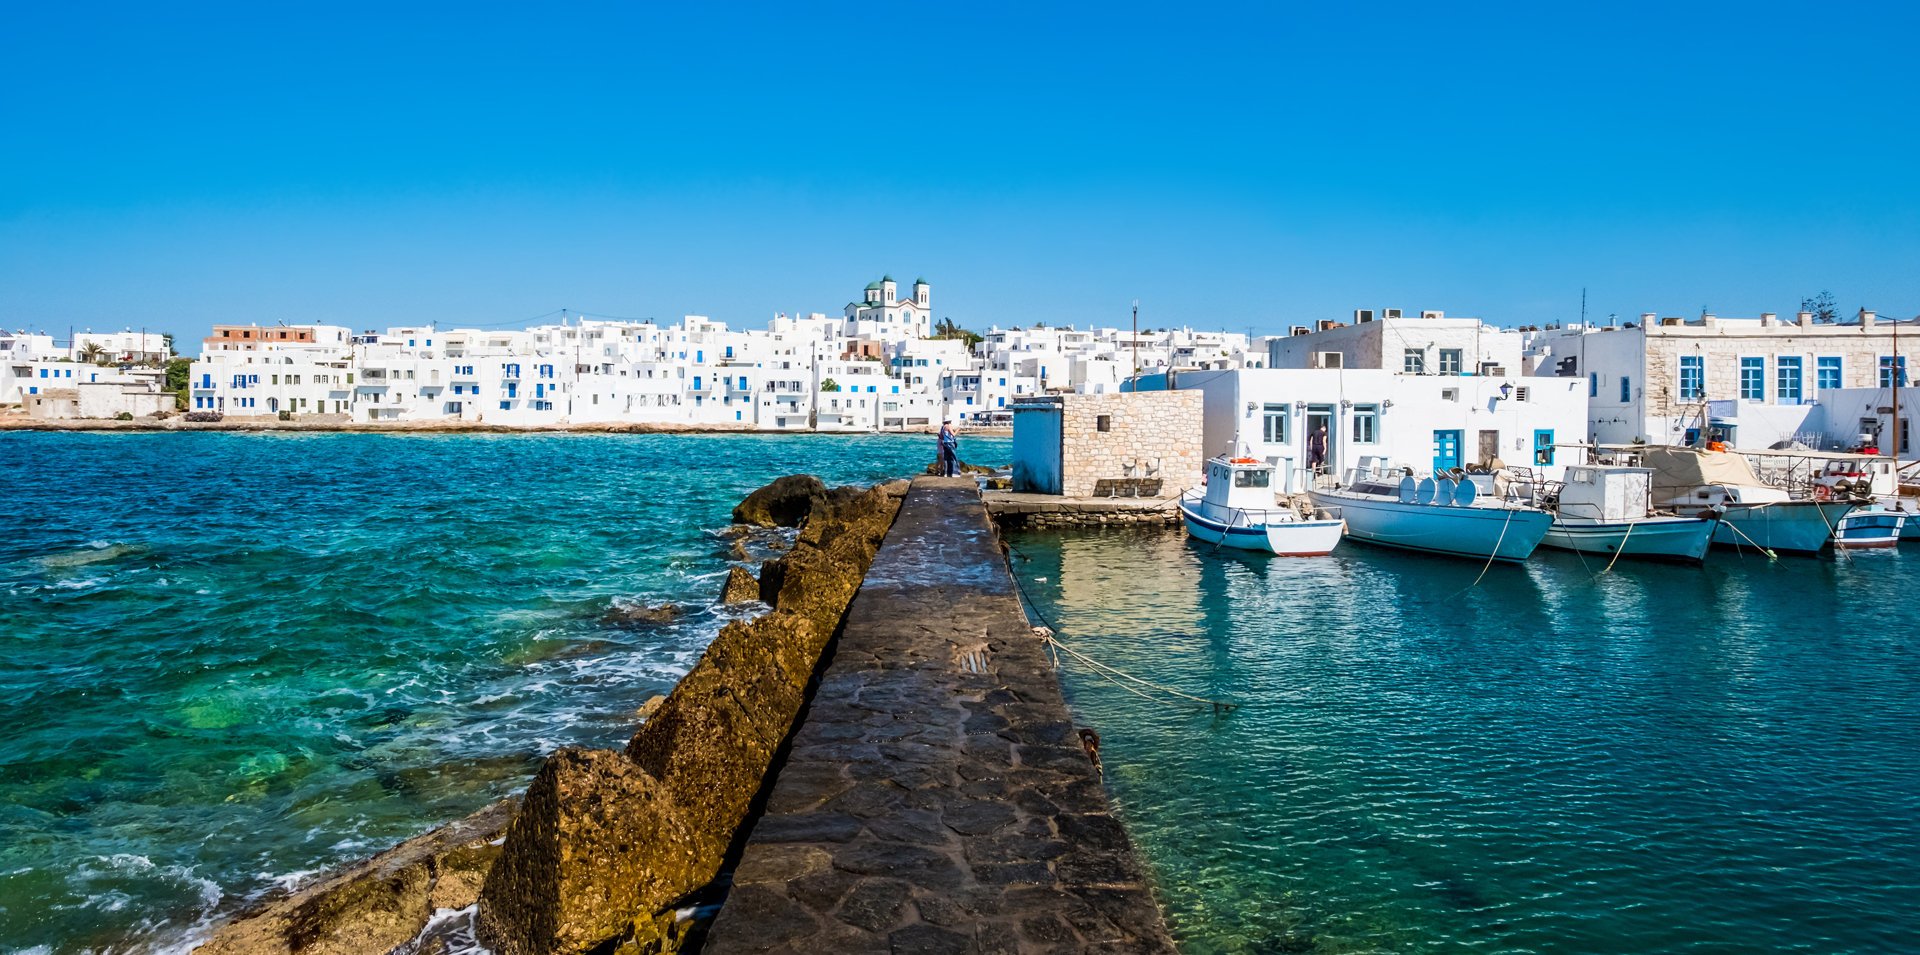 View of the traditional white houses on the promenade of Naoussa Paros, from the harbor on a sunny day